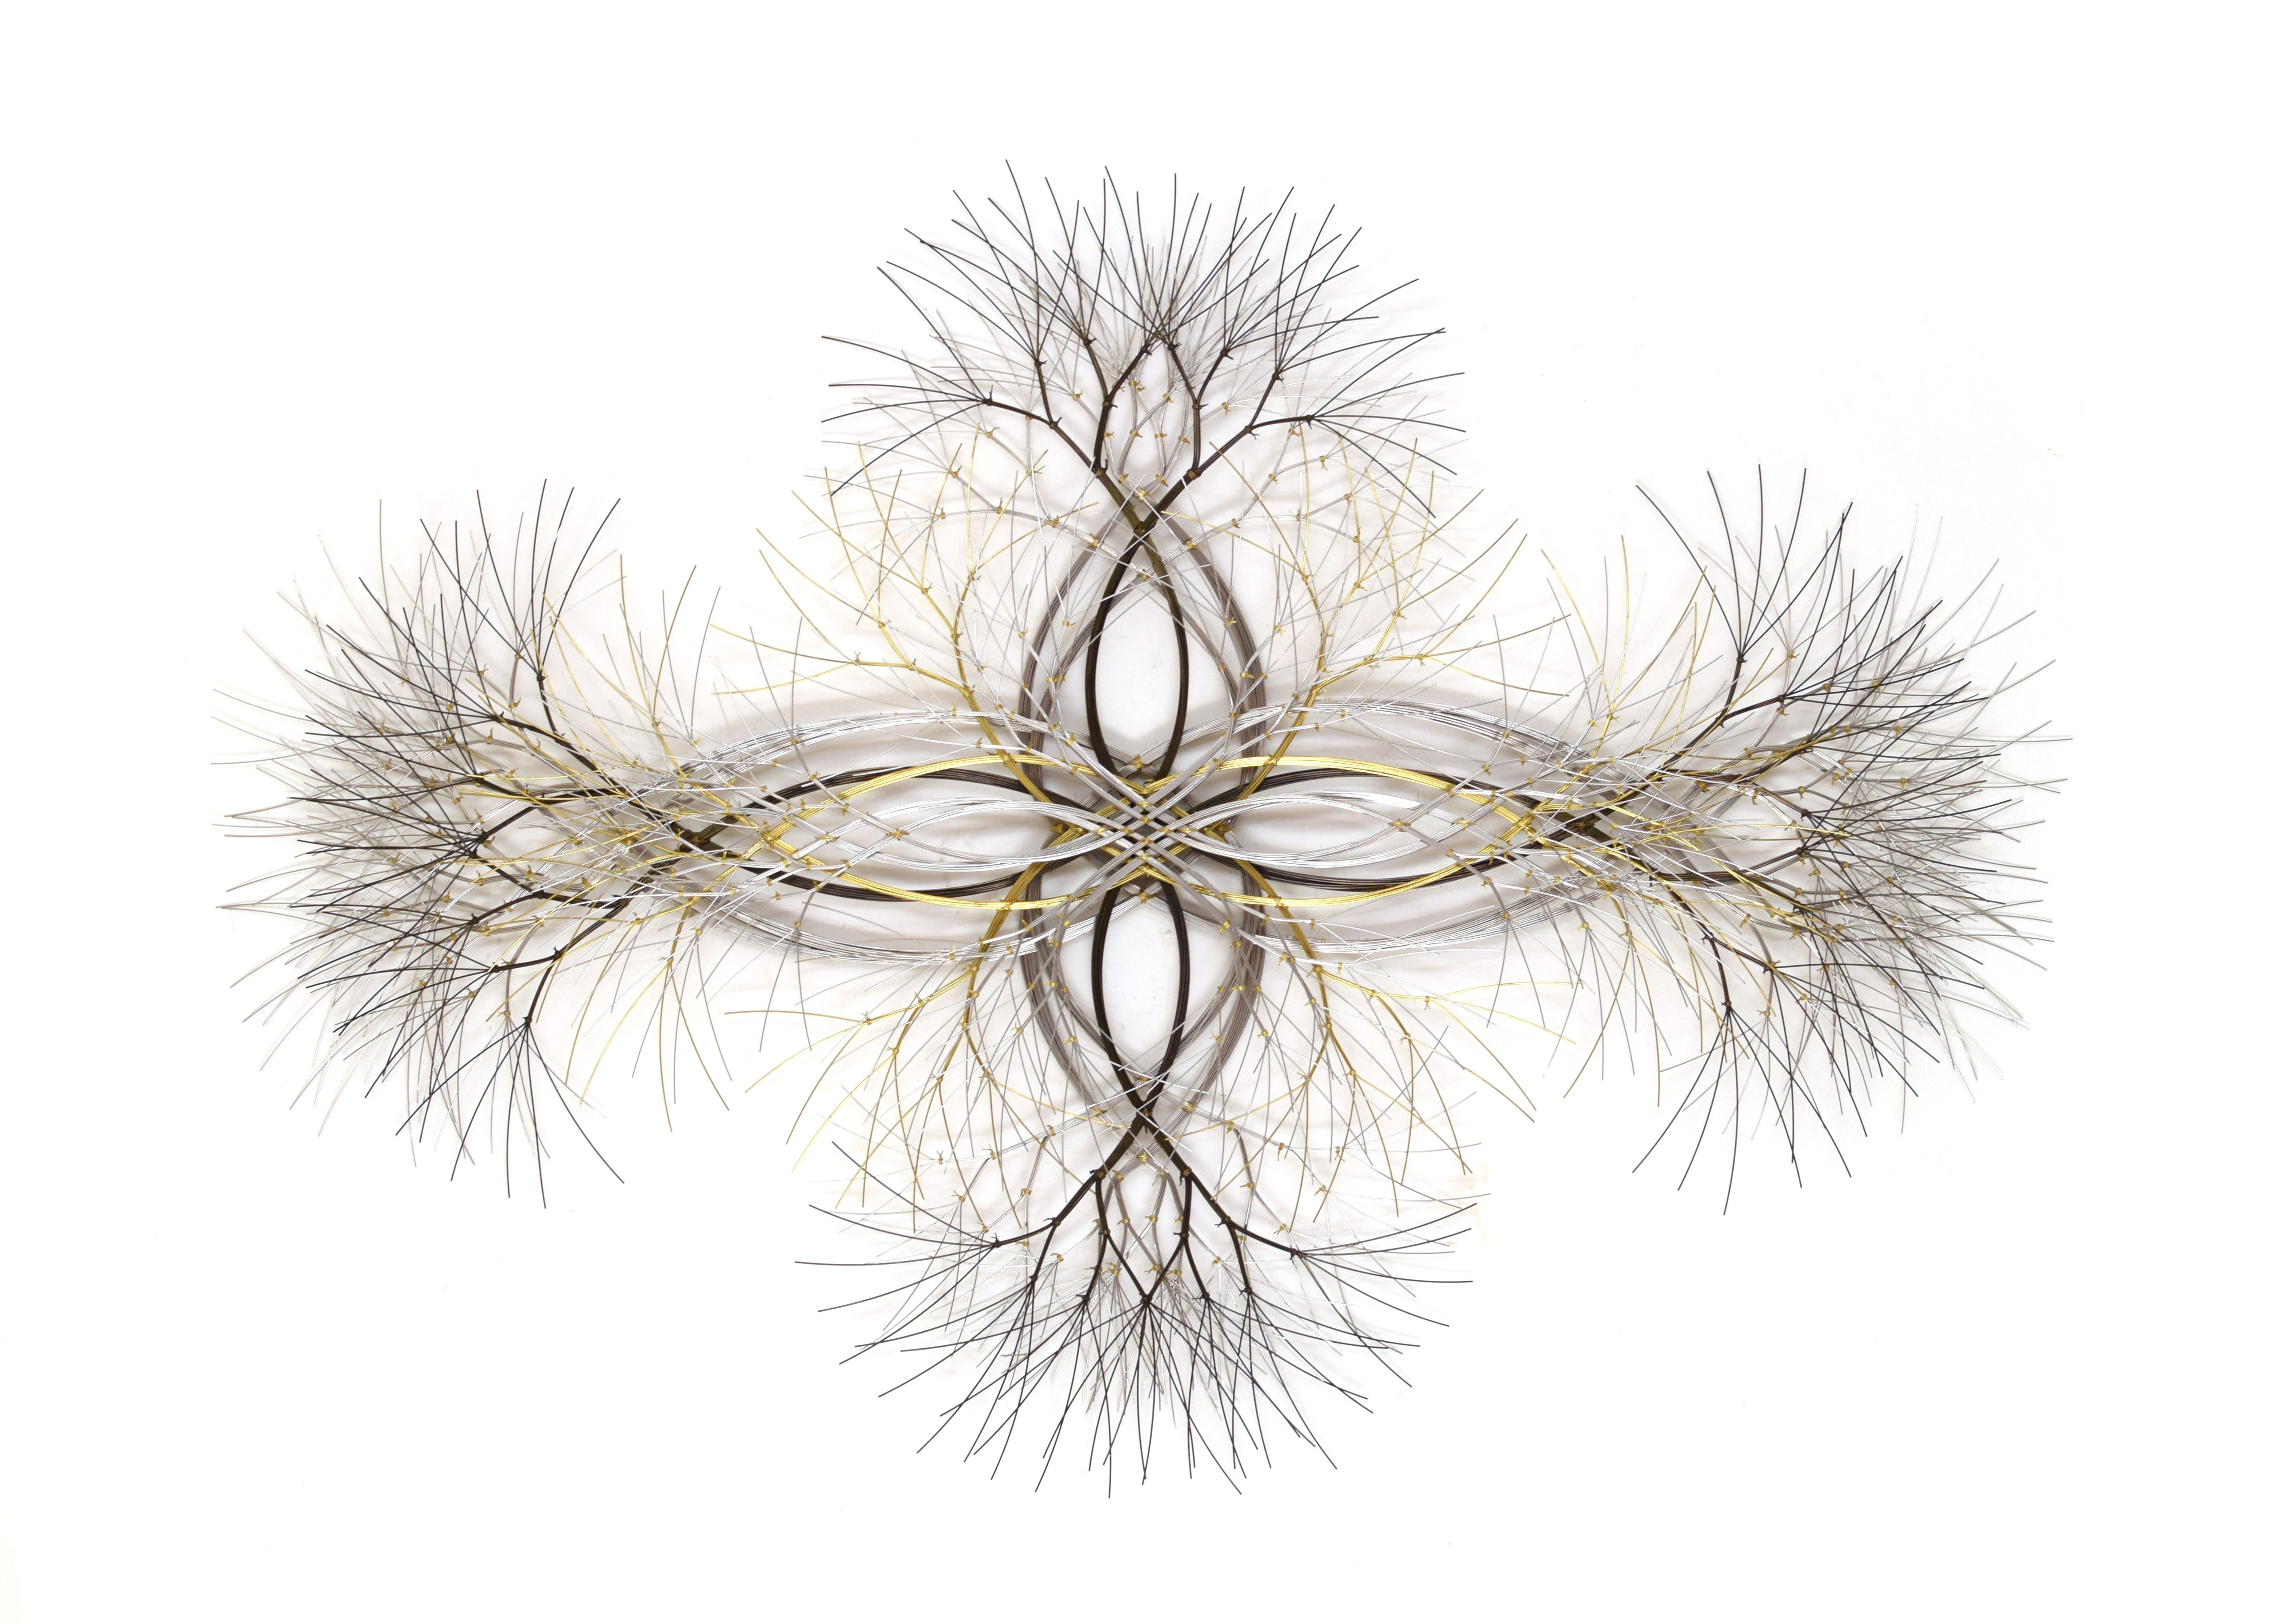 59"x43" Metal Wall Sculpture in Brass, Stainless, and Bronze #631. Available Now